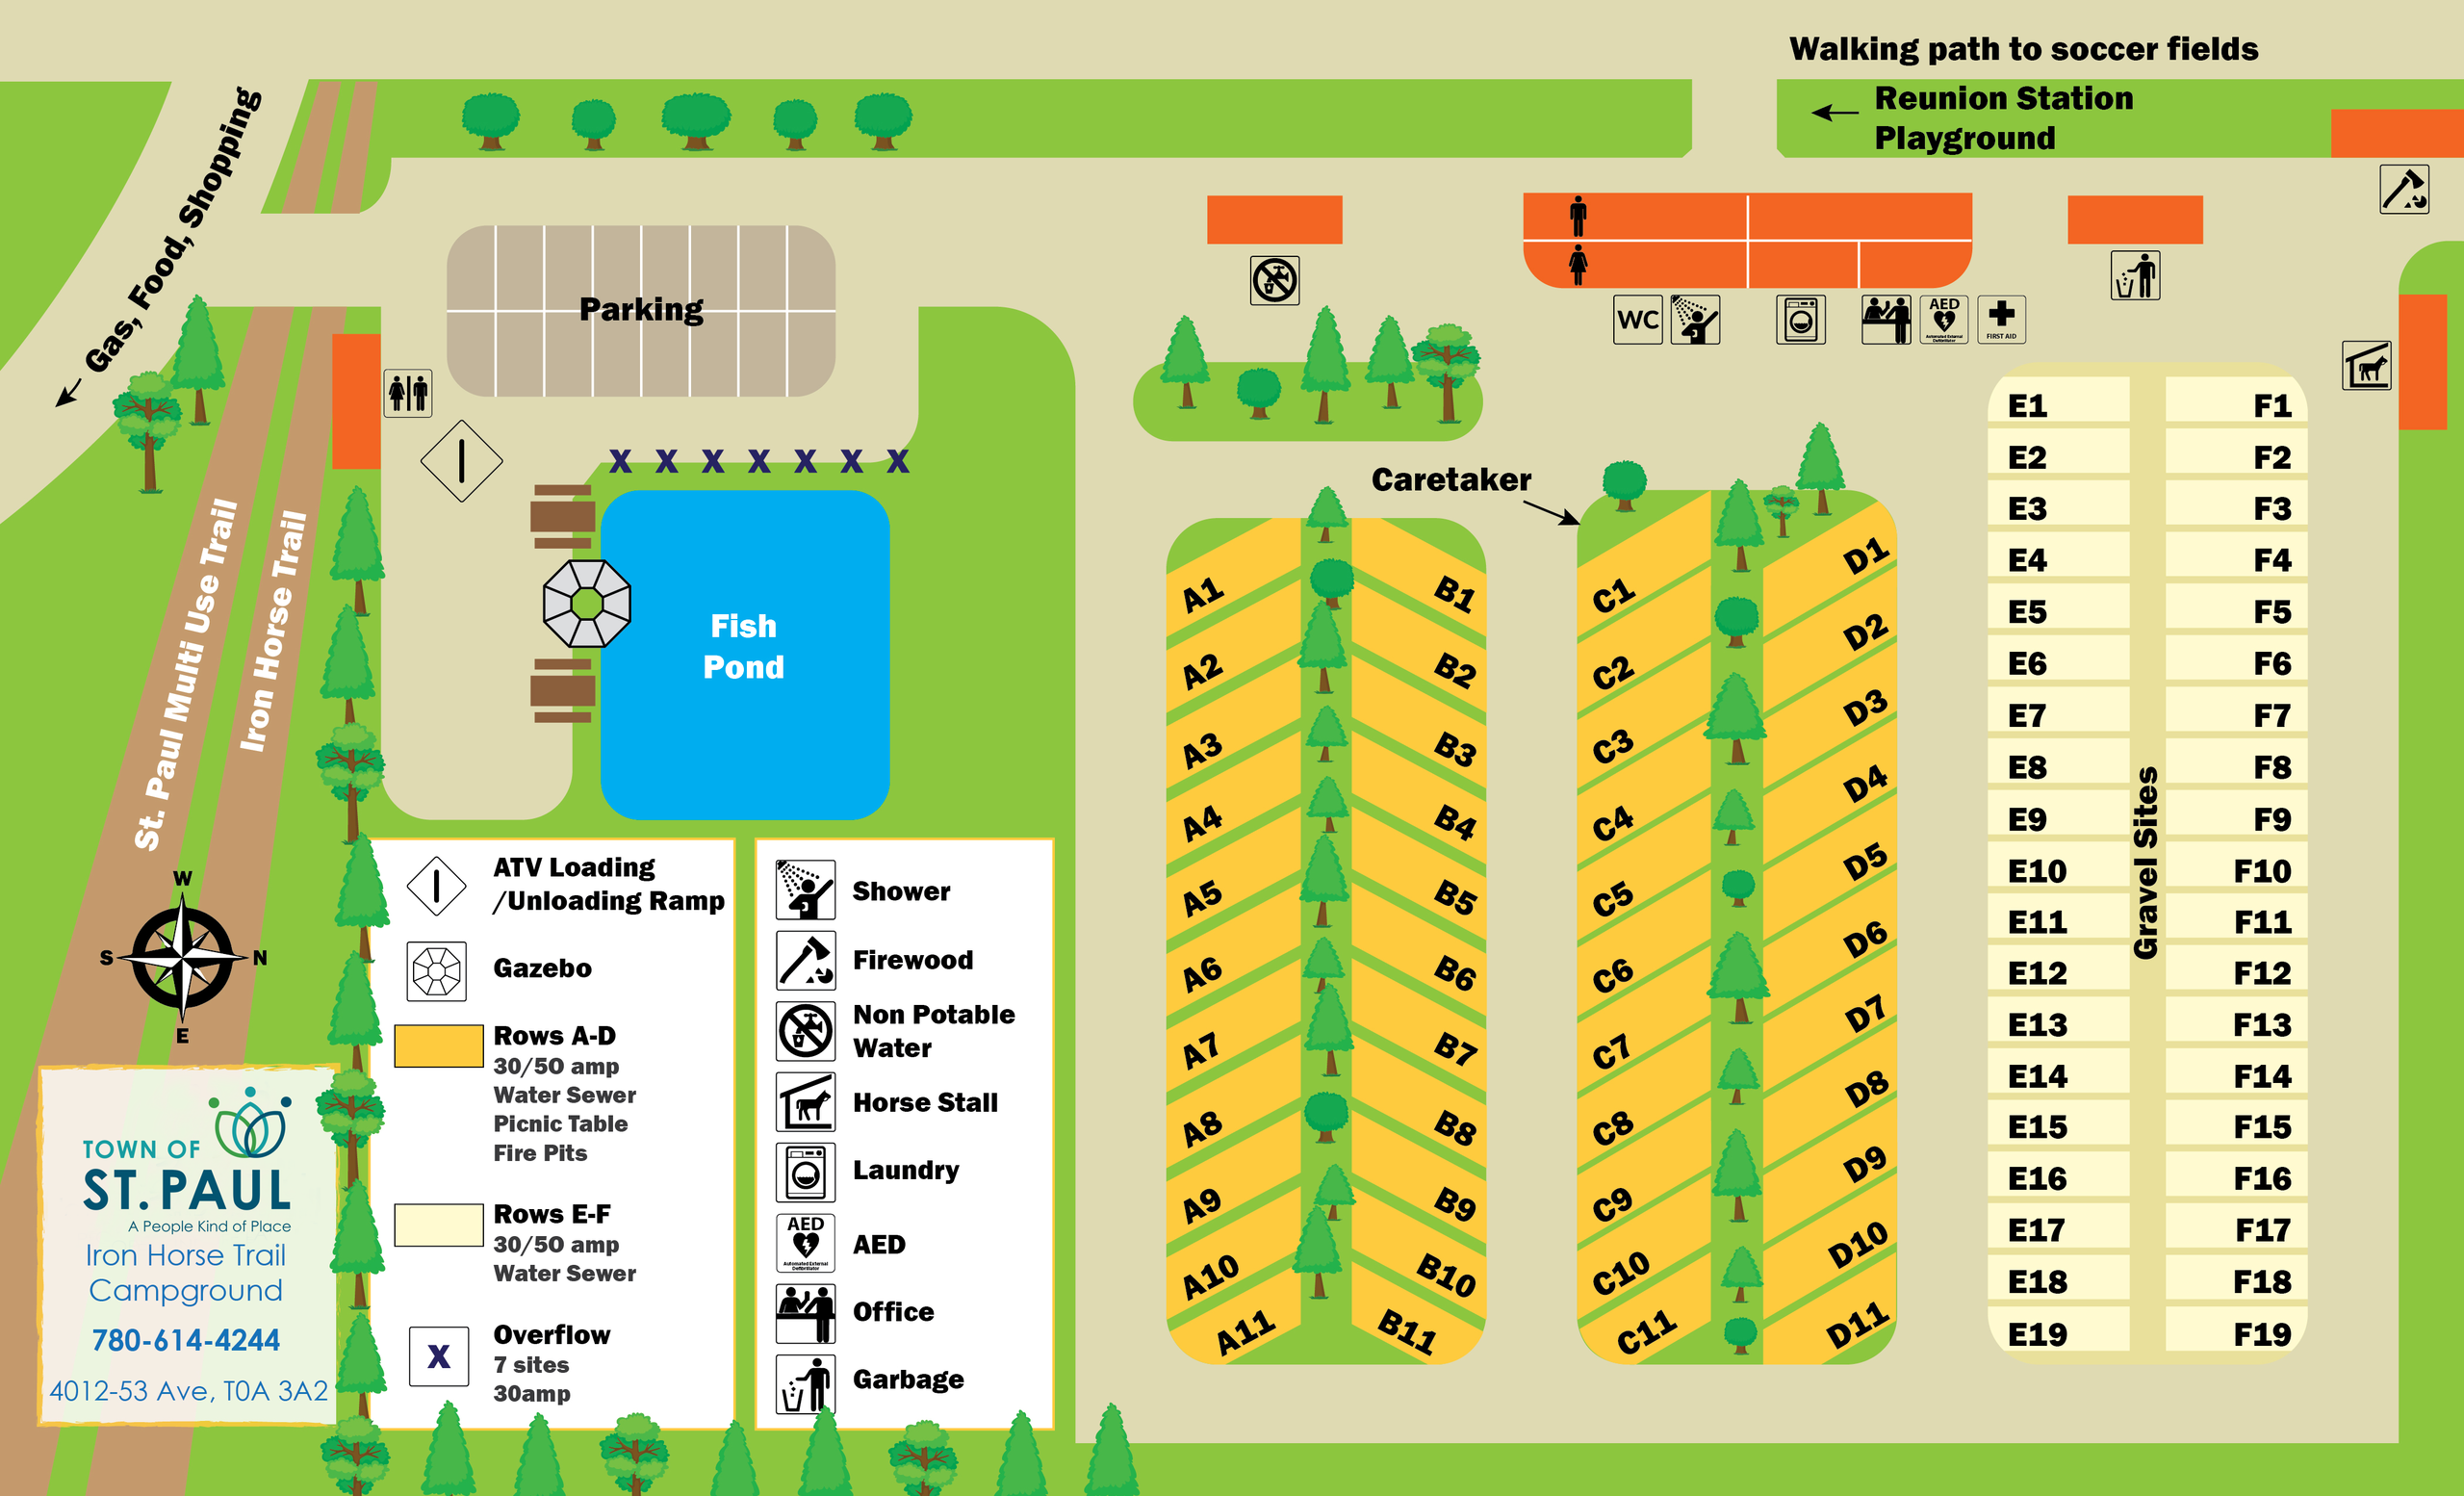 Map-Iron_Horse_Trail_Campground